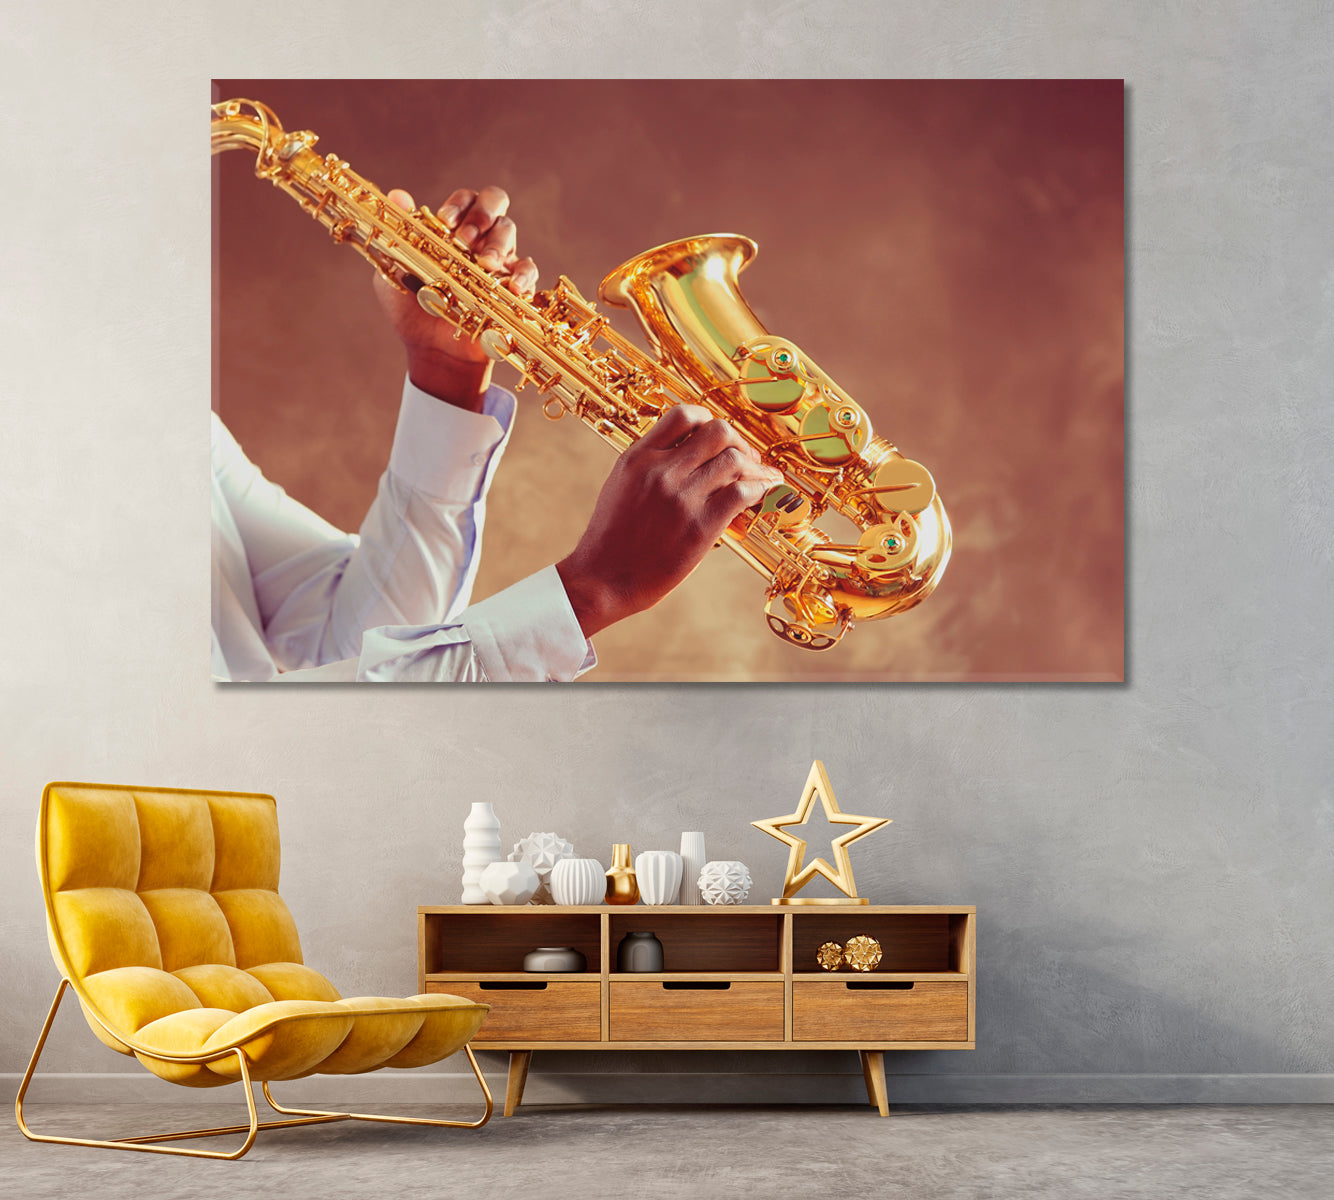 African American Jazz Musician Playing Saxophone Canvas Print ArtLexy 1 Panel 24"x16" inches 